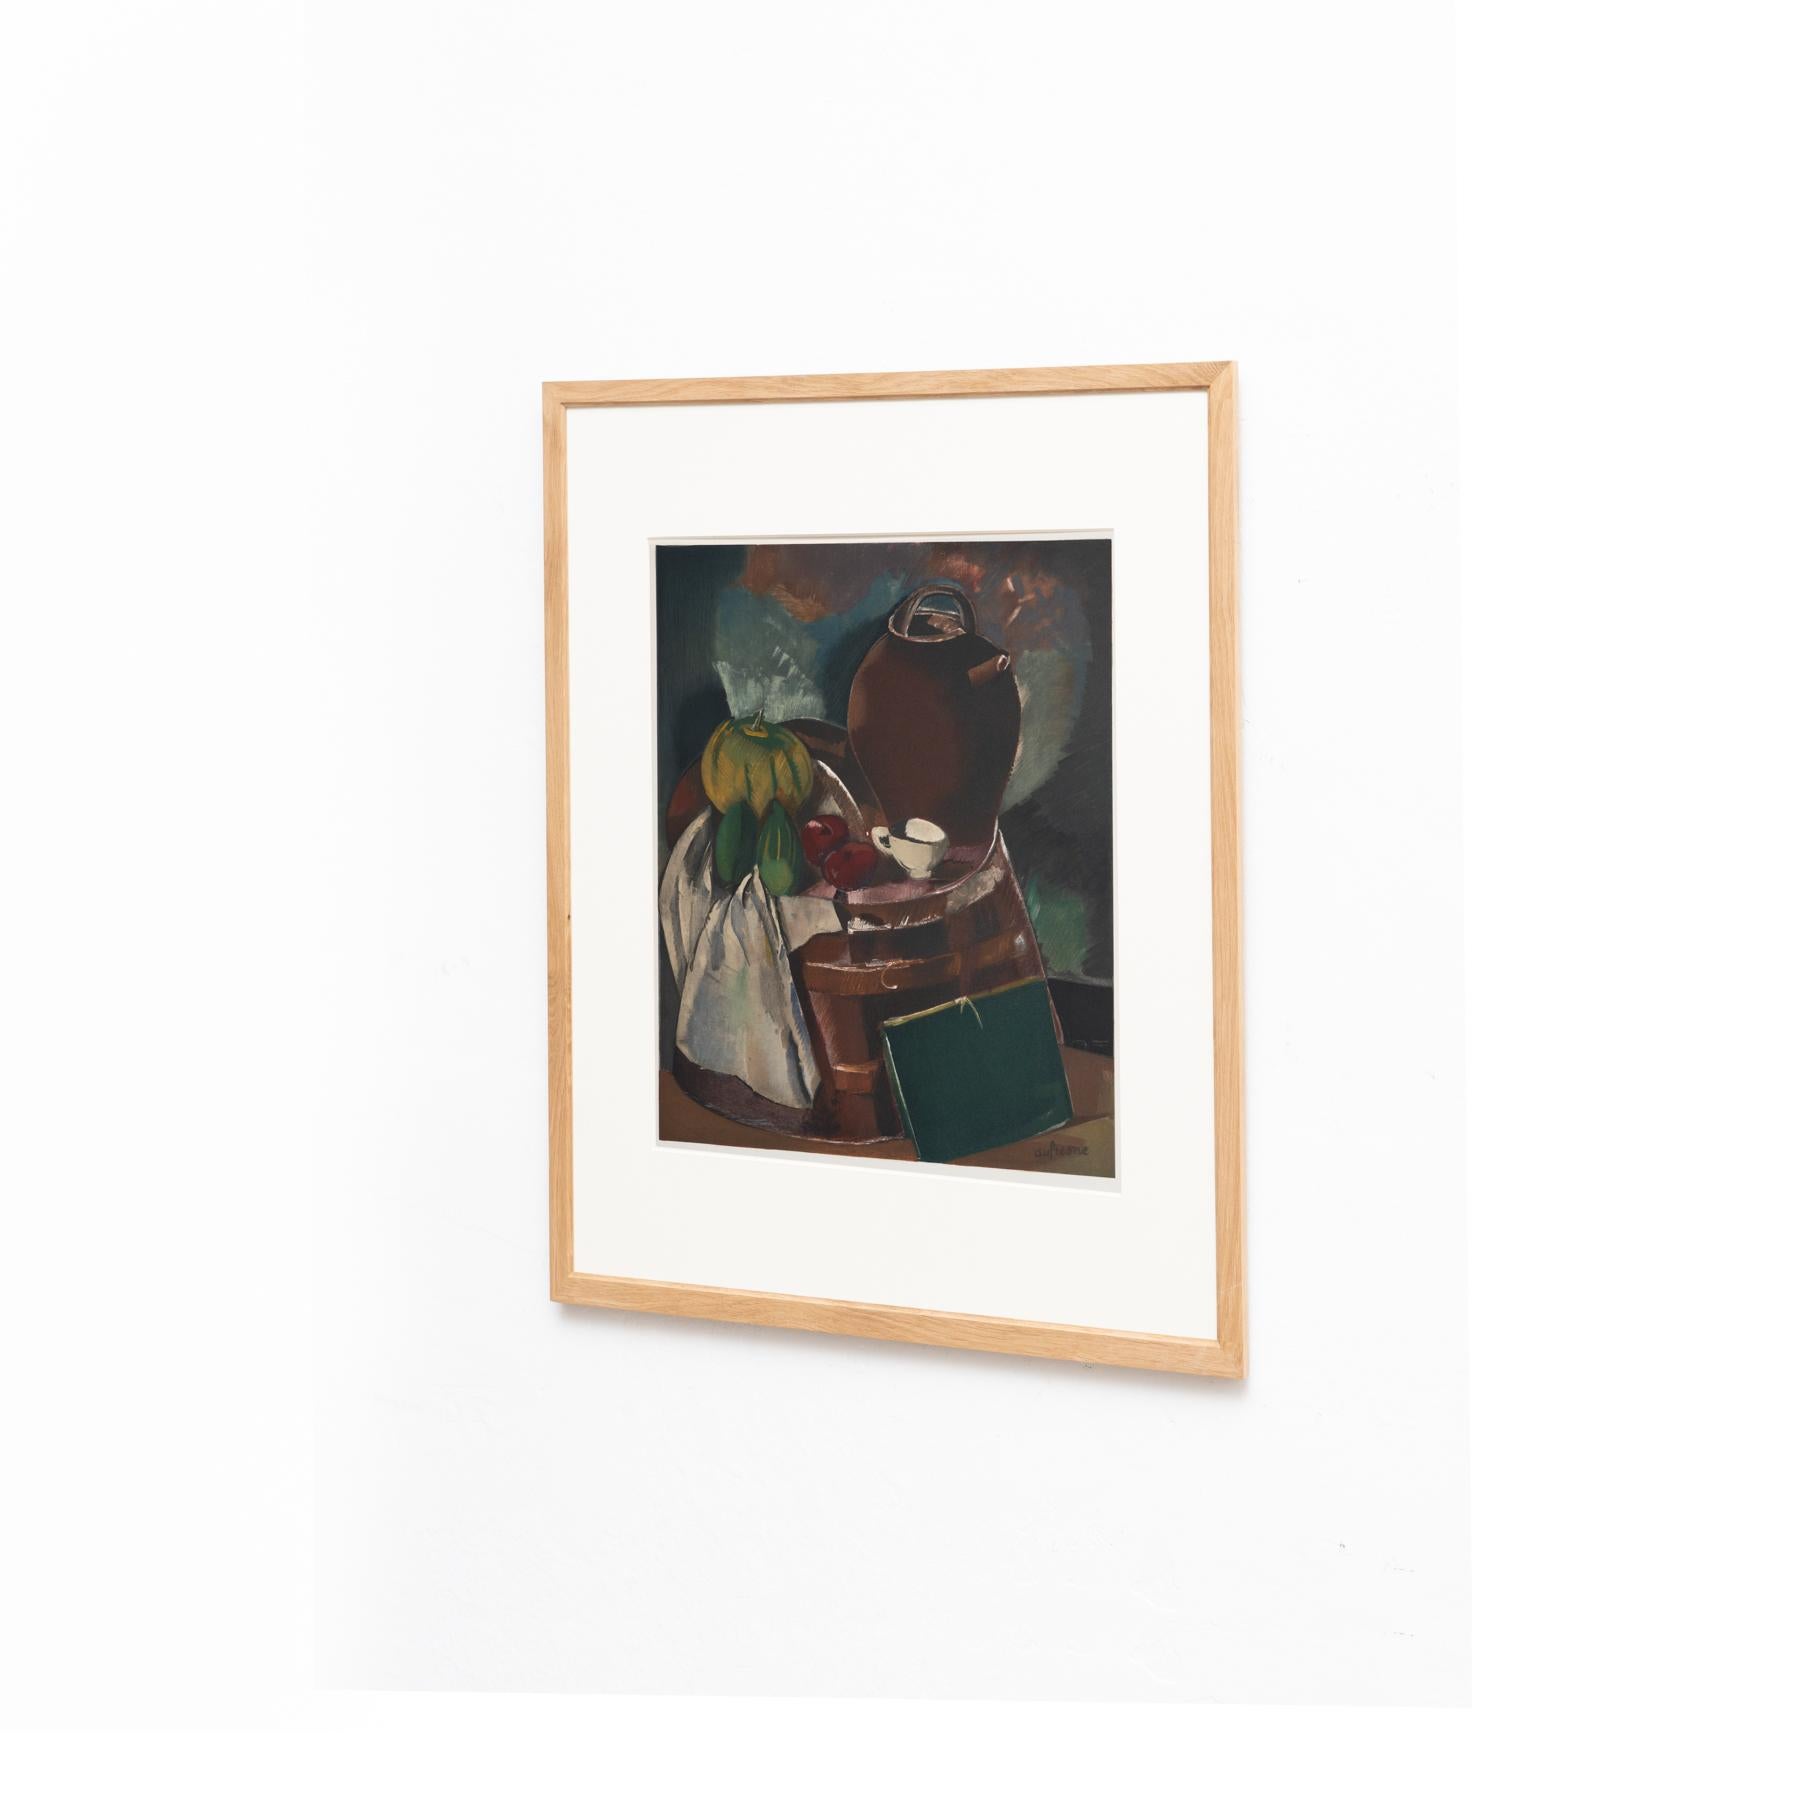 Original 'Nature morte aux fruits' color lithograph by Charles Dufresne.

Lithograph printed from an original painting made by the author in France, circa 1919.

Published by Mourlot in Collection Pierre Levy in 1971, Paris. 

Framed and